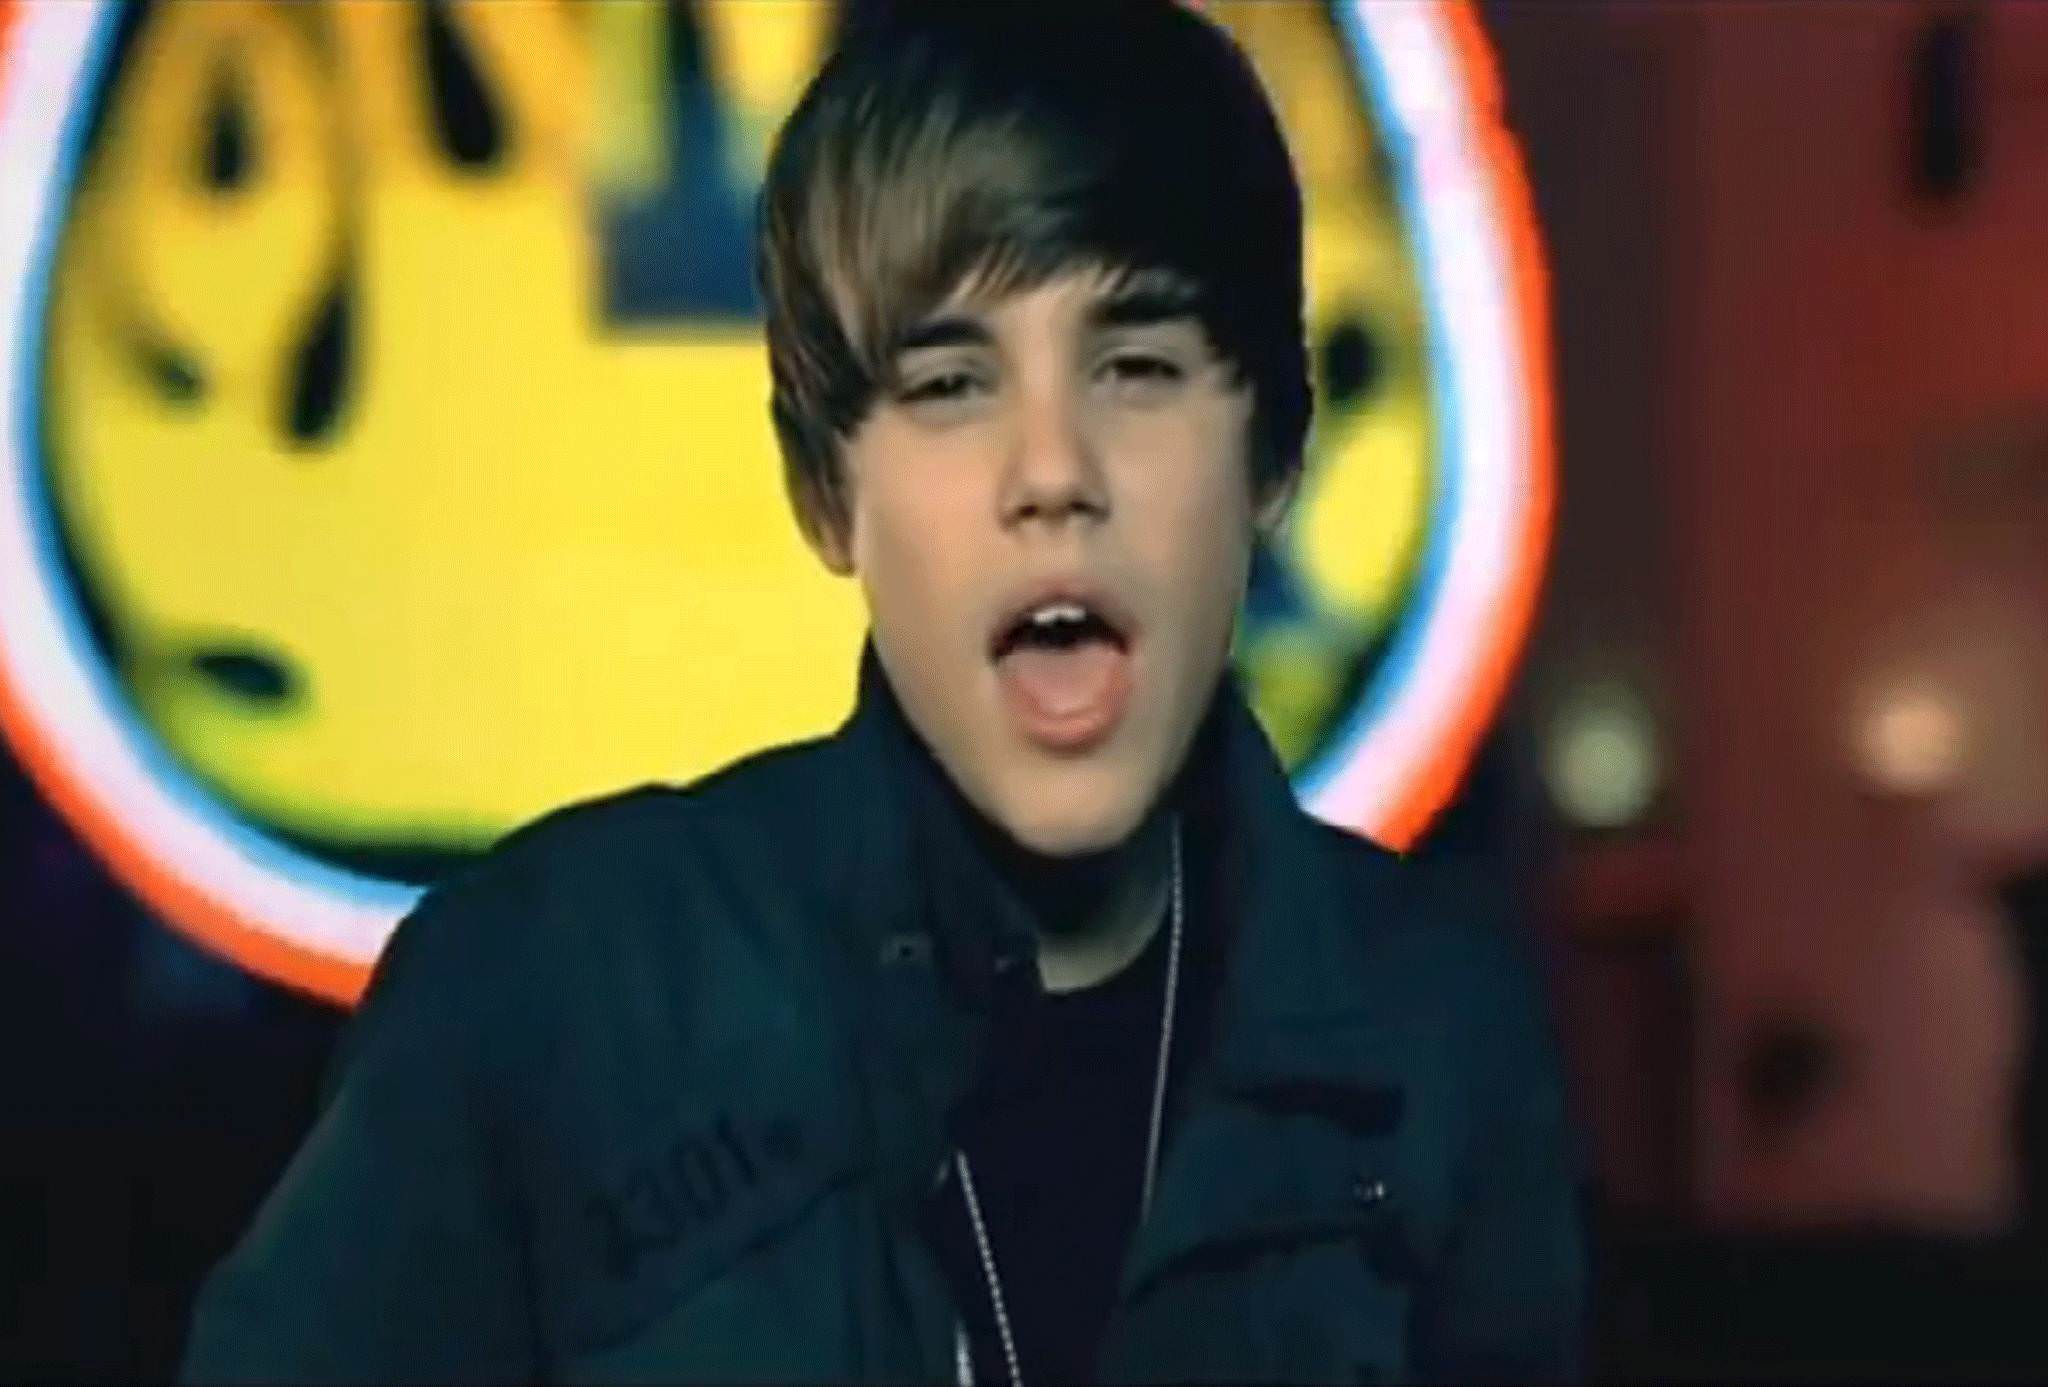 How Come Justin Bieber's Baby Is The Most Disliked Video ...